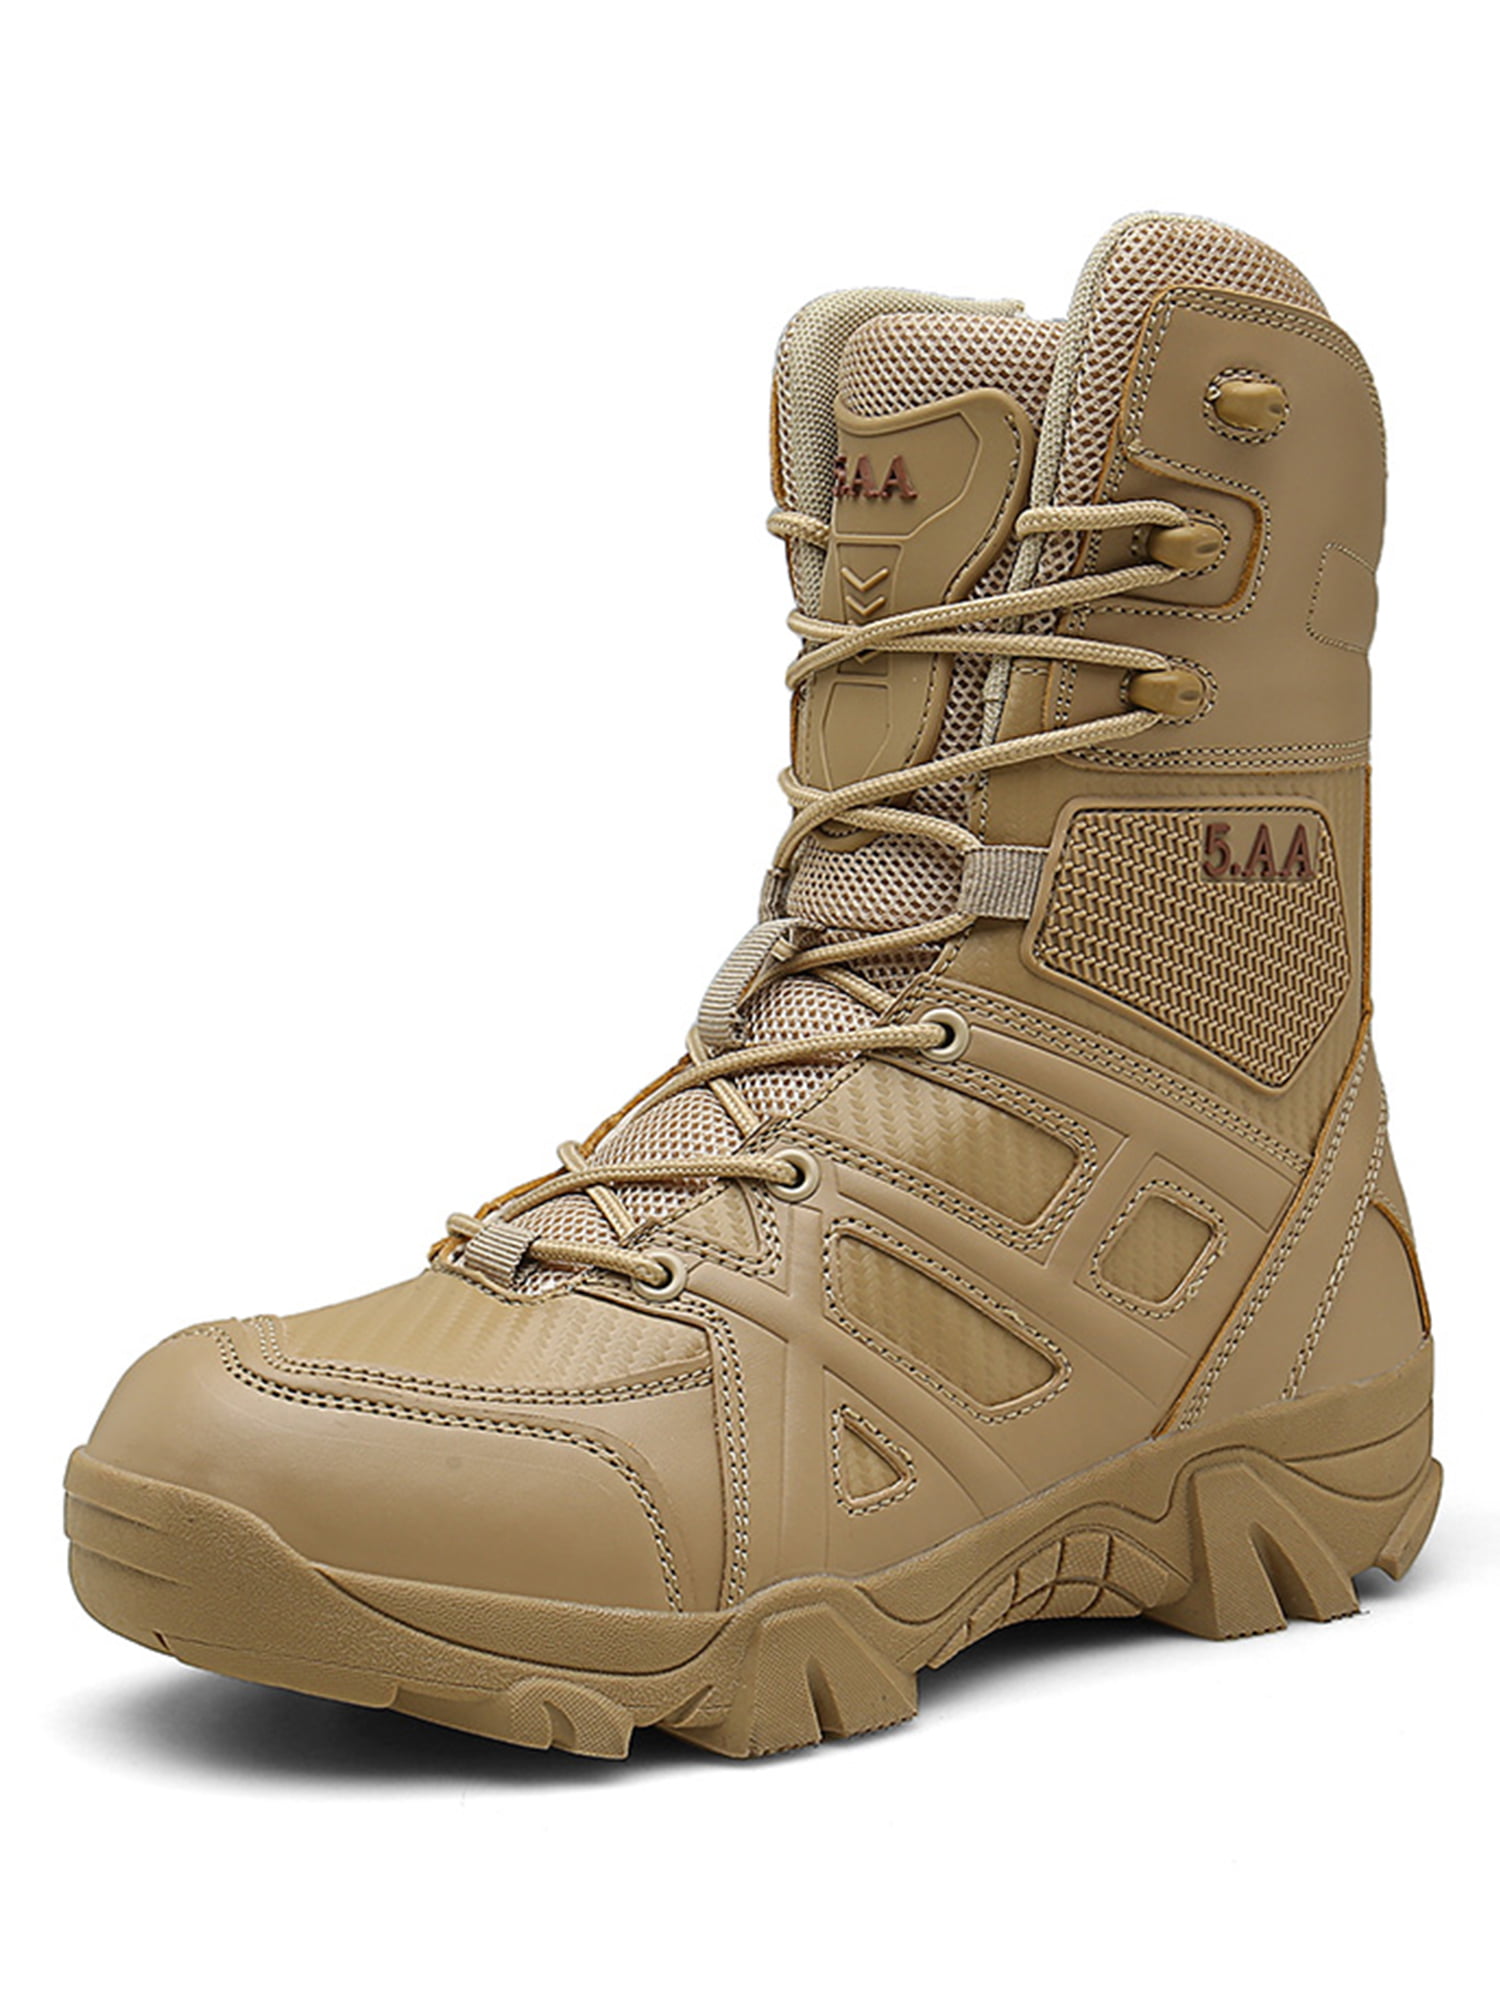 Mens Outdoor Military Tactical Boots Desert Combat Boots Lace Up Army Ankle Boot 